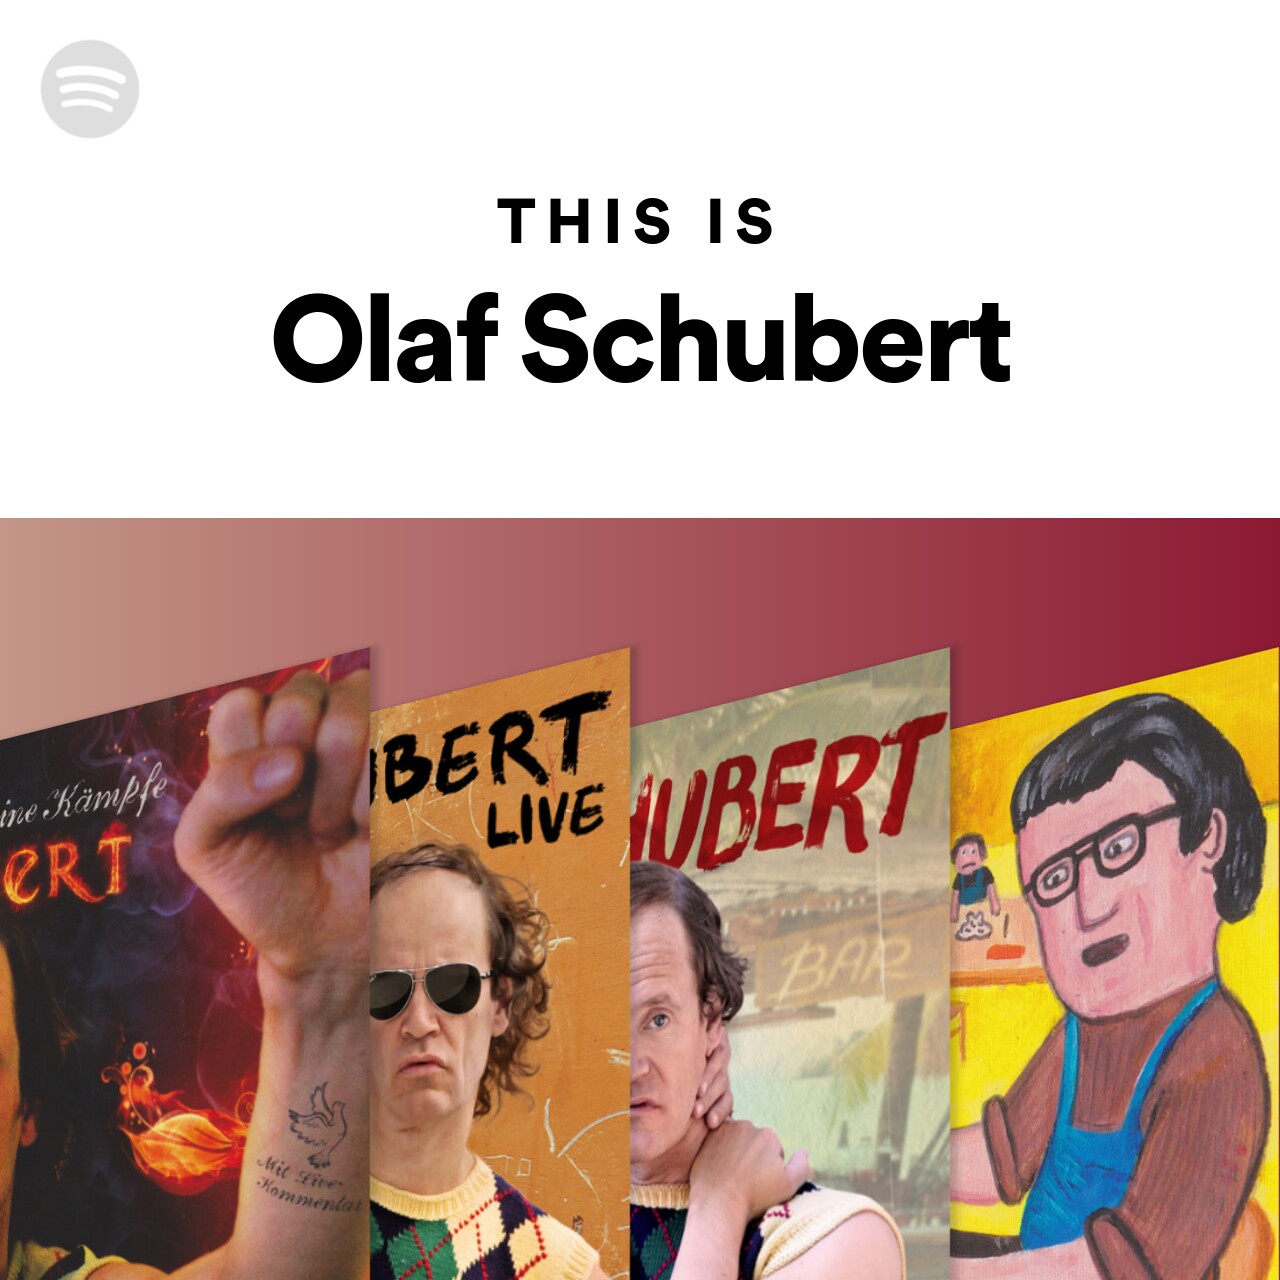 This is Olaf Schubert